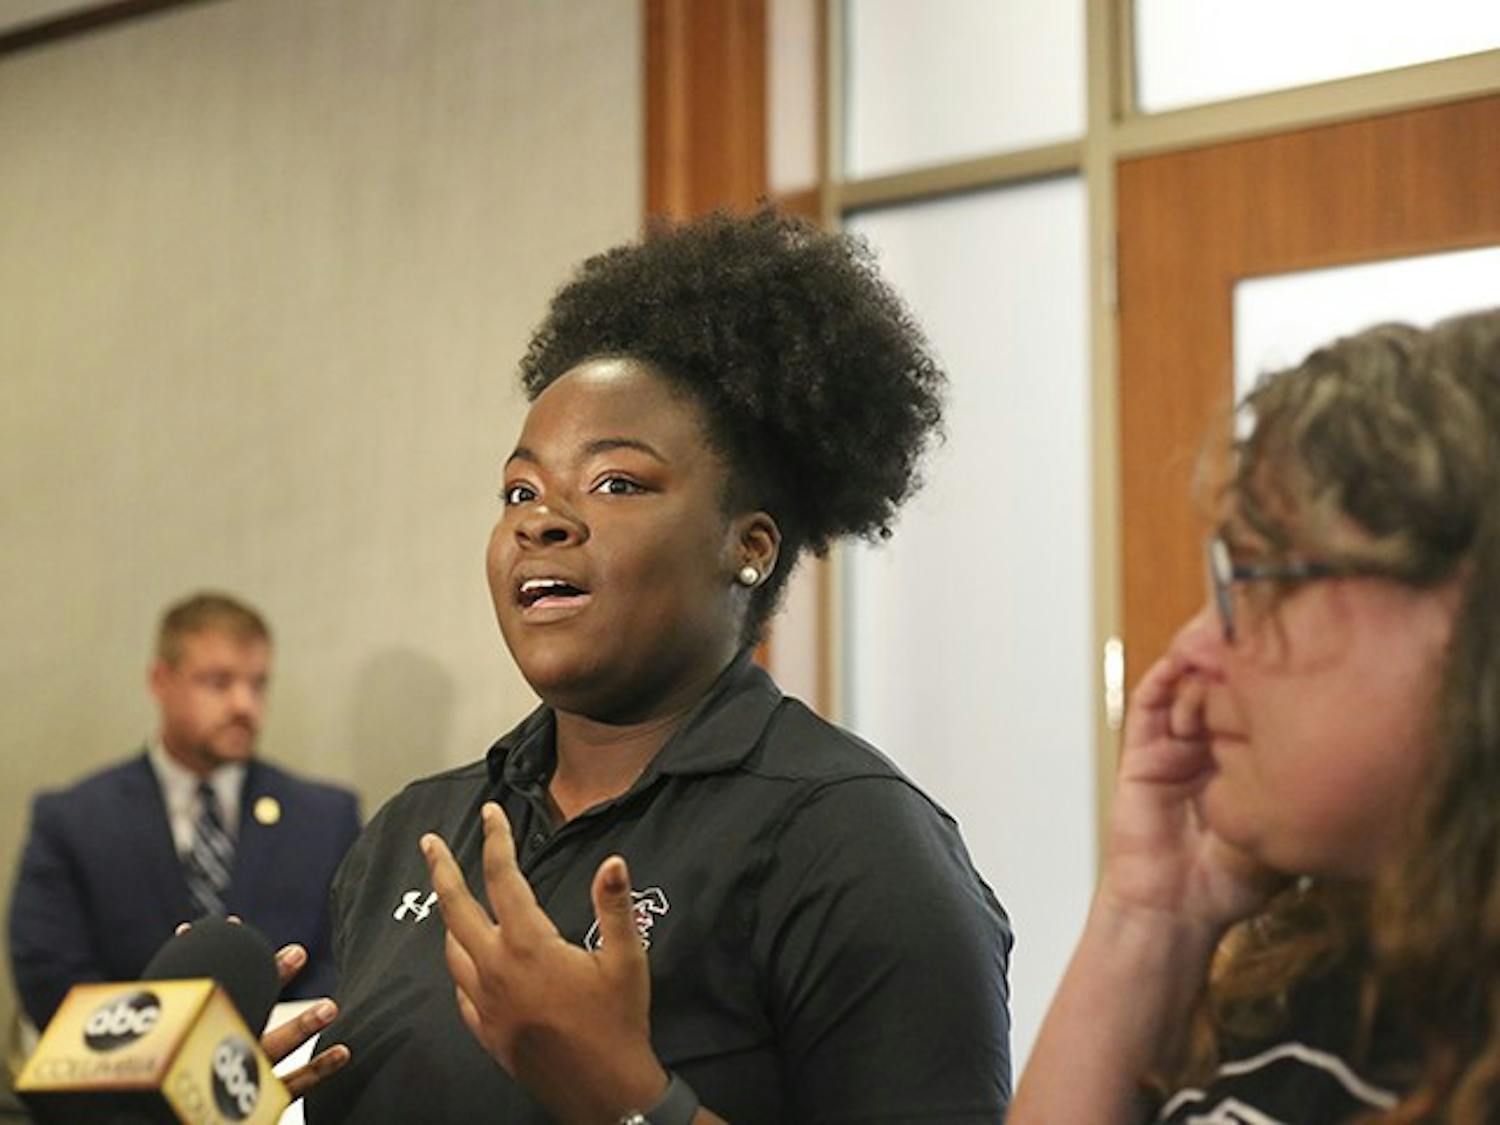 Third-year sports and entertainment management major Lyric Swinton speaks to student, faculty, reporters following the announcement of the Board of trustees selecting Gen. Robert Caslen as the 29th president of the University of South Carolina. 